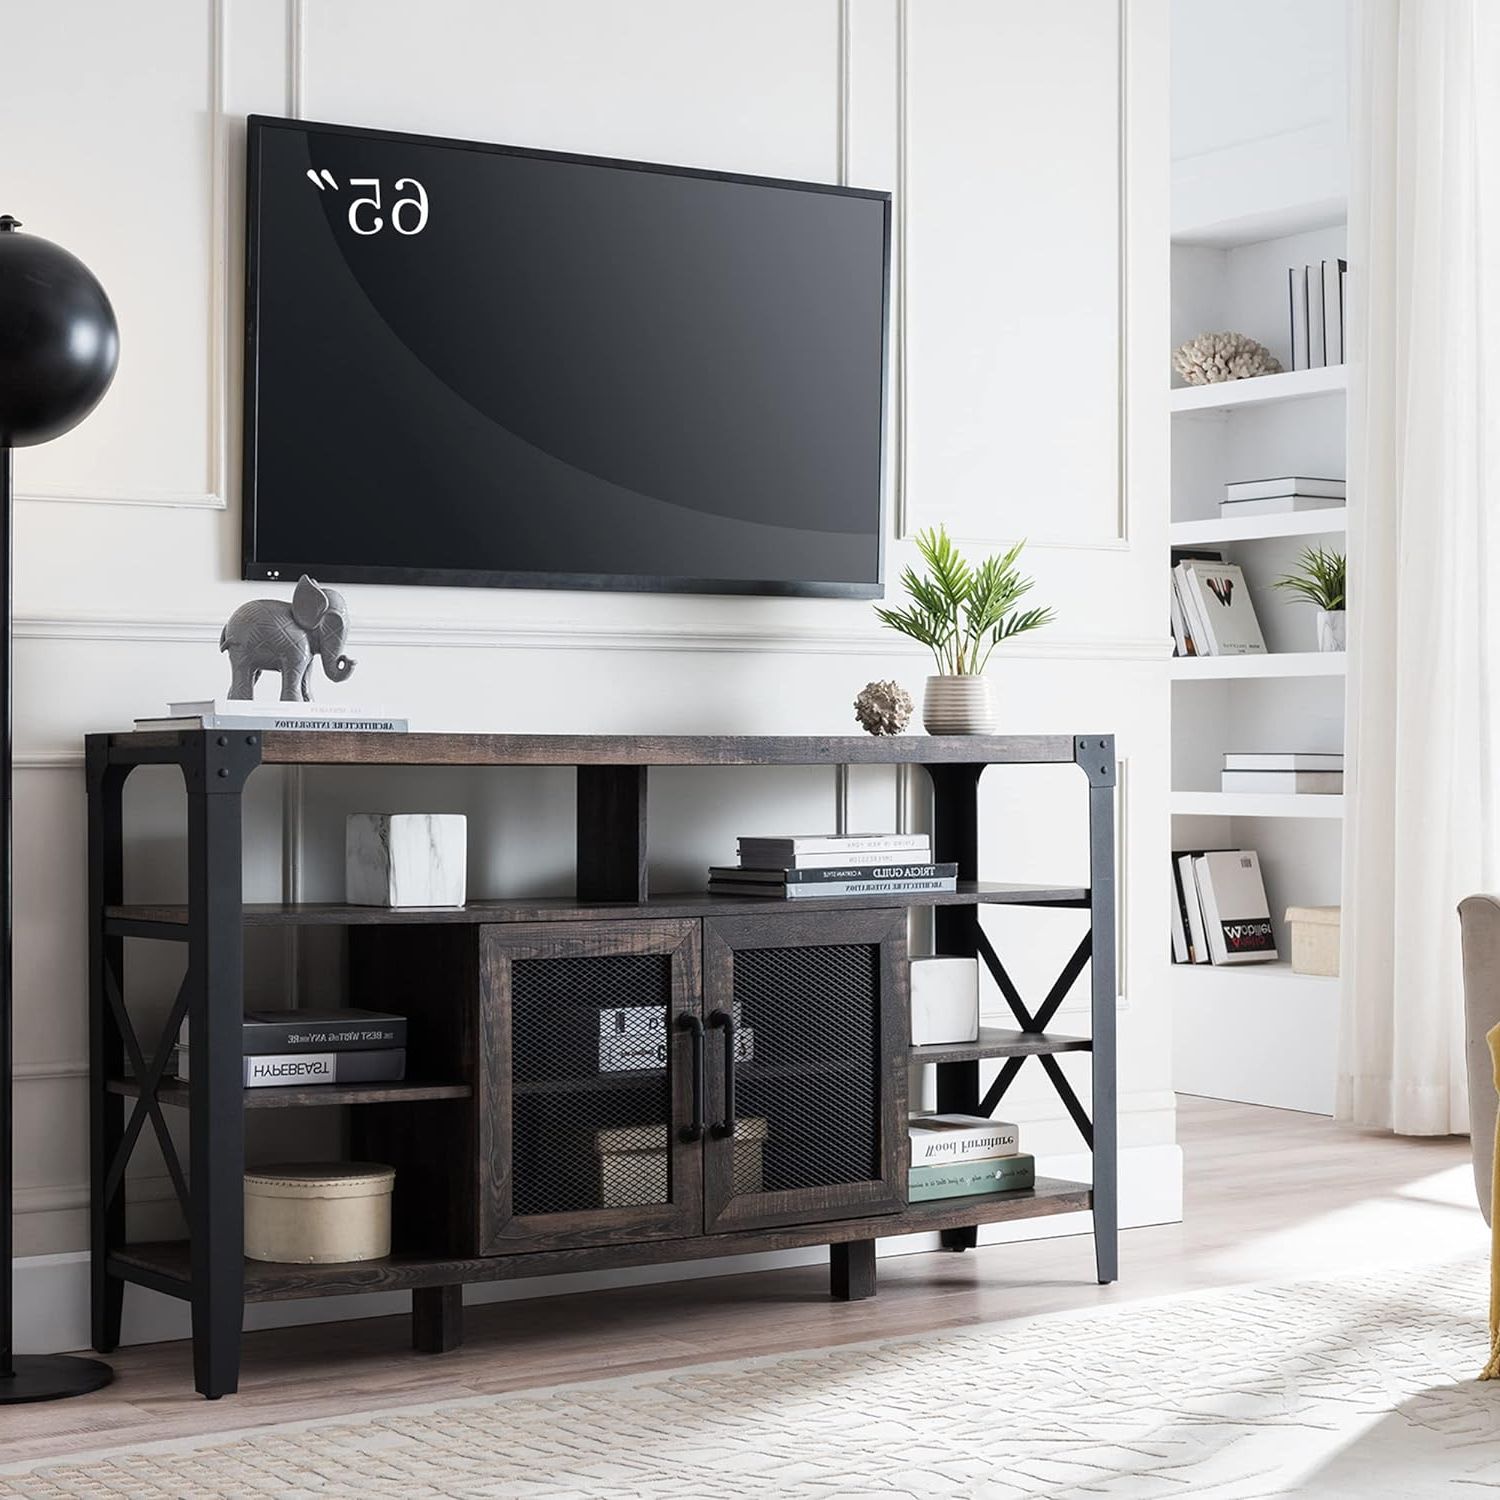 Okd Tv Stand Industrial Rustic Entertainment Center Italy | Ubuy Intended For Wide Entertainment Centers (Gallery 6 of 20)